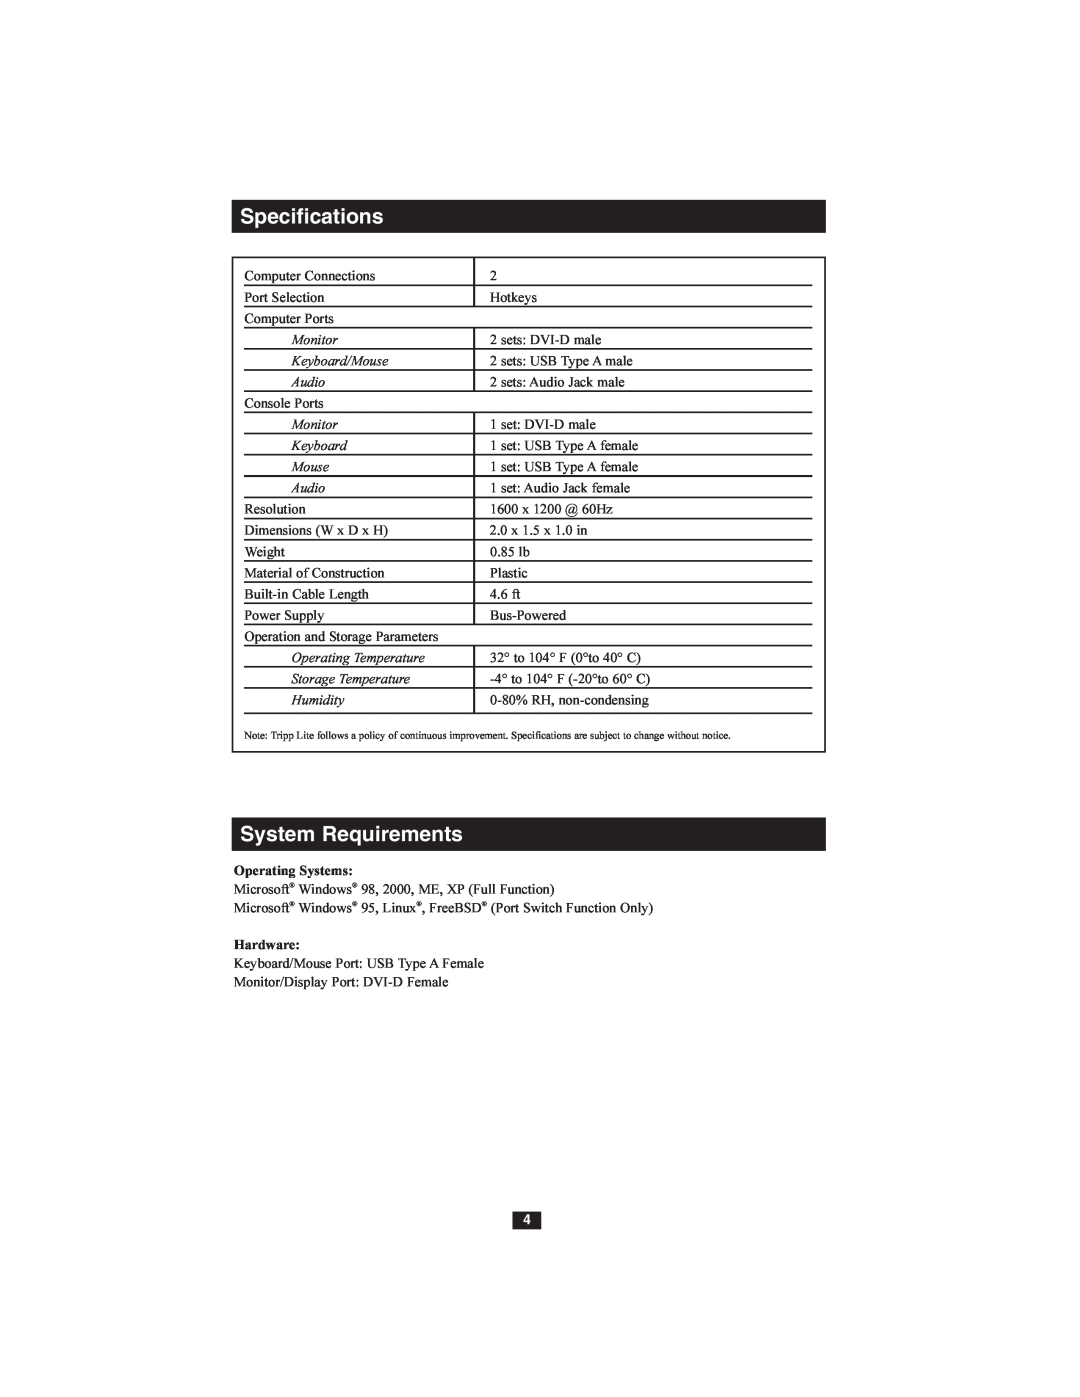 Tripp Lite B036-002-R owner manual Specifications, System Requirements 